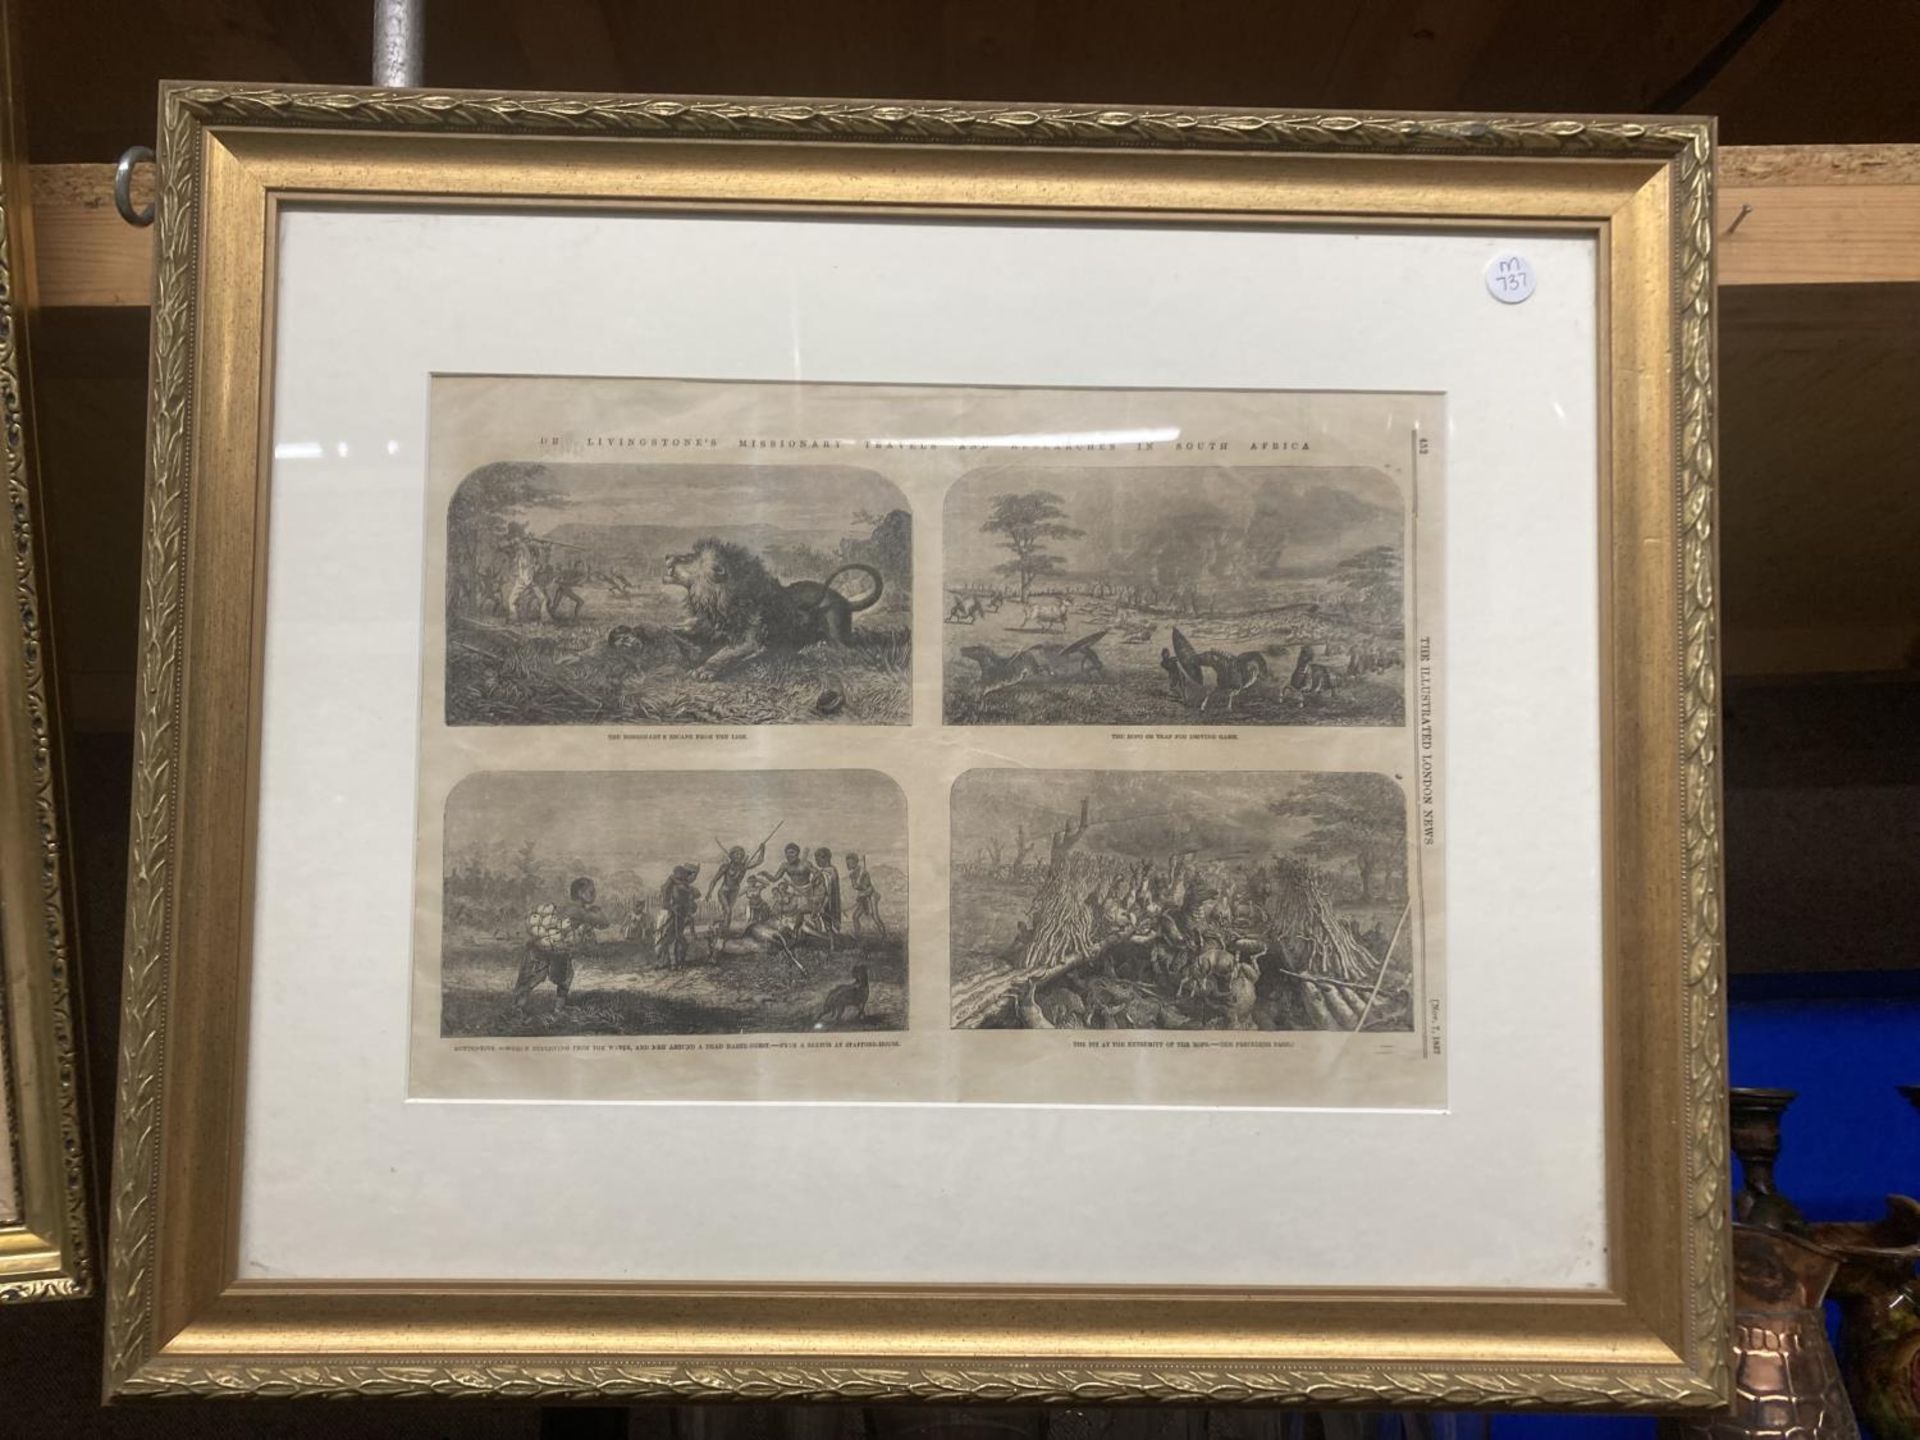 A FRAMED NEWSPAPER CUTTING OF DR LIVINGSTONE'S MISSIONARY TRAVELS AND RESEARCHES IN SOUTH AFRICA